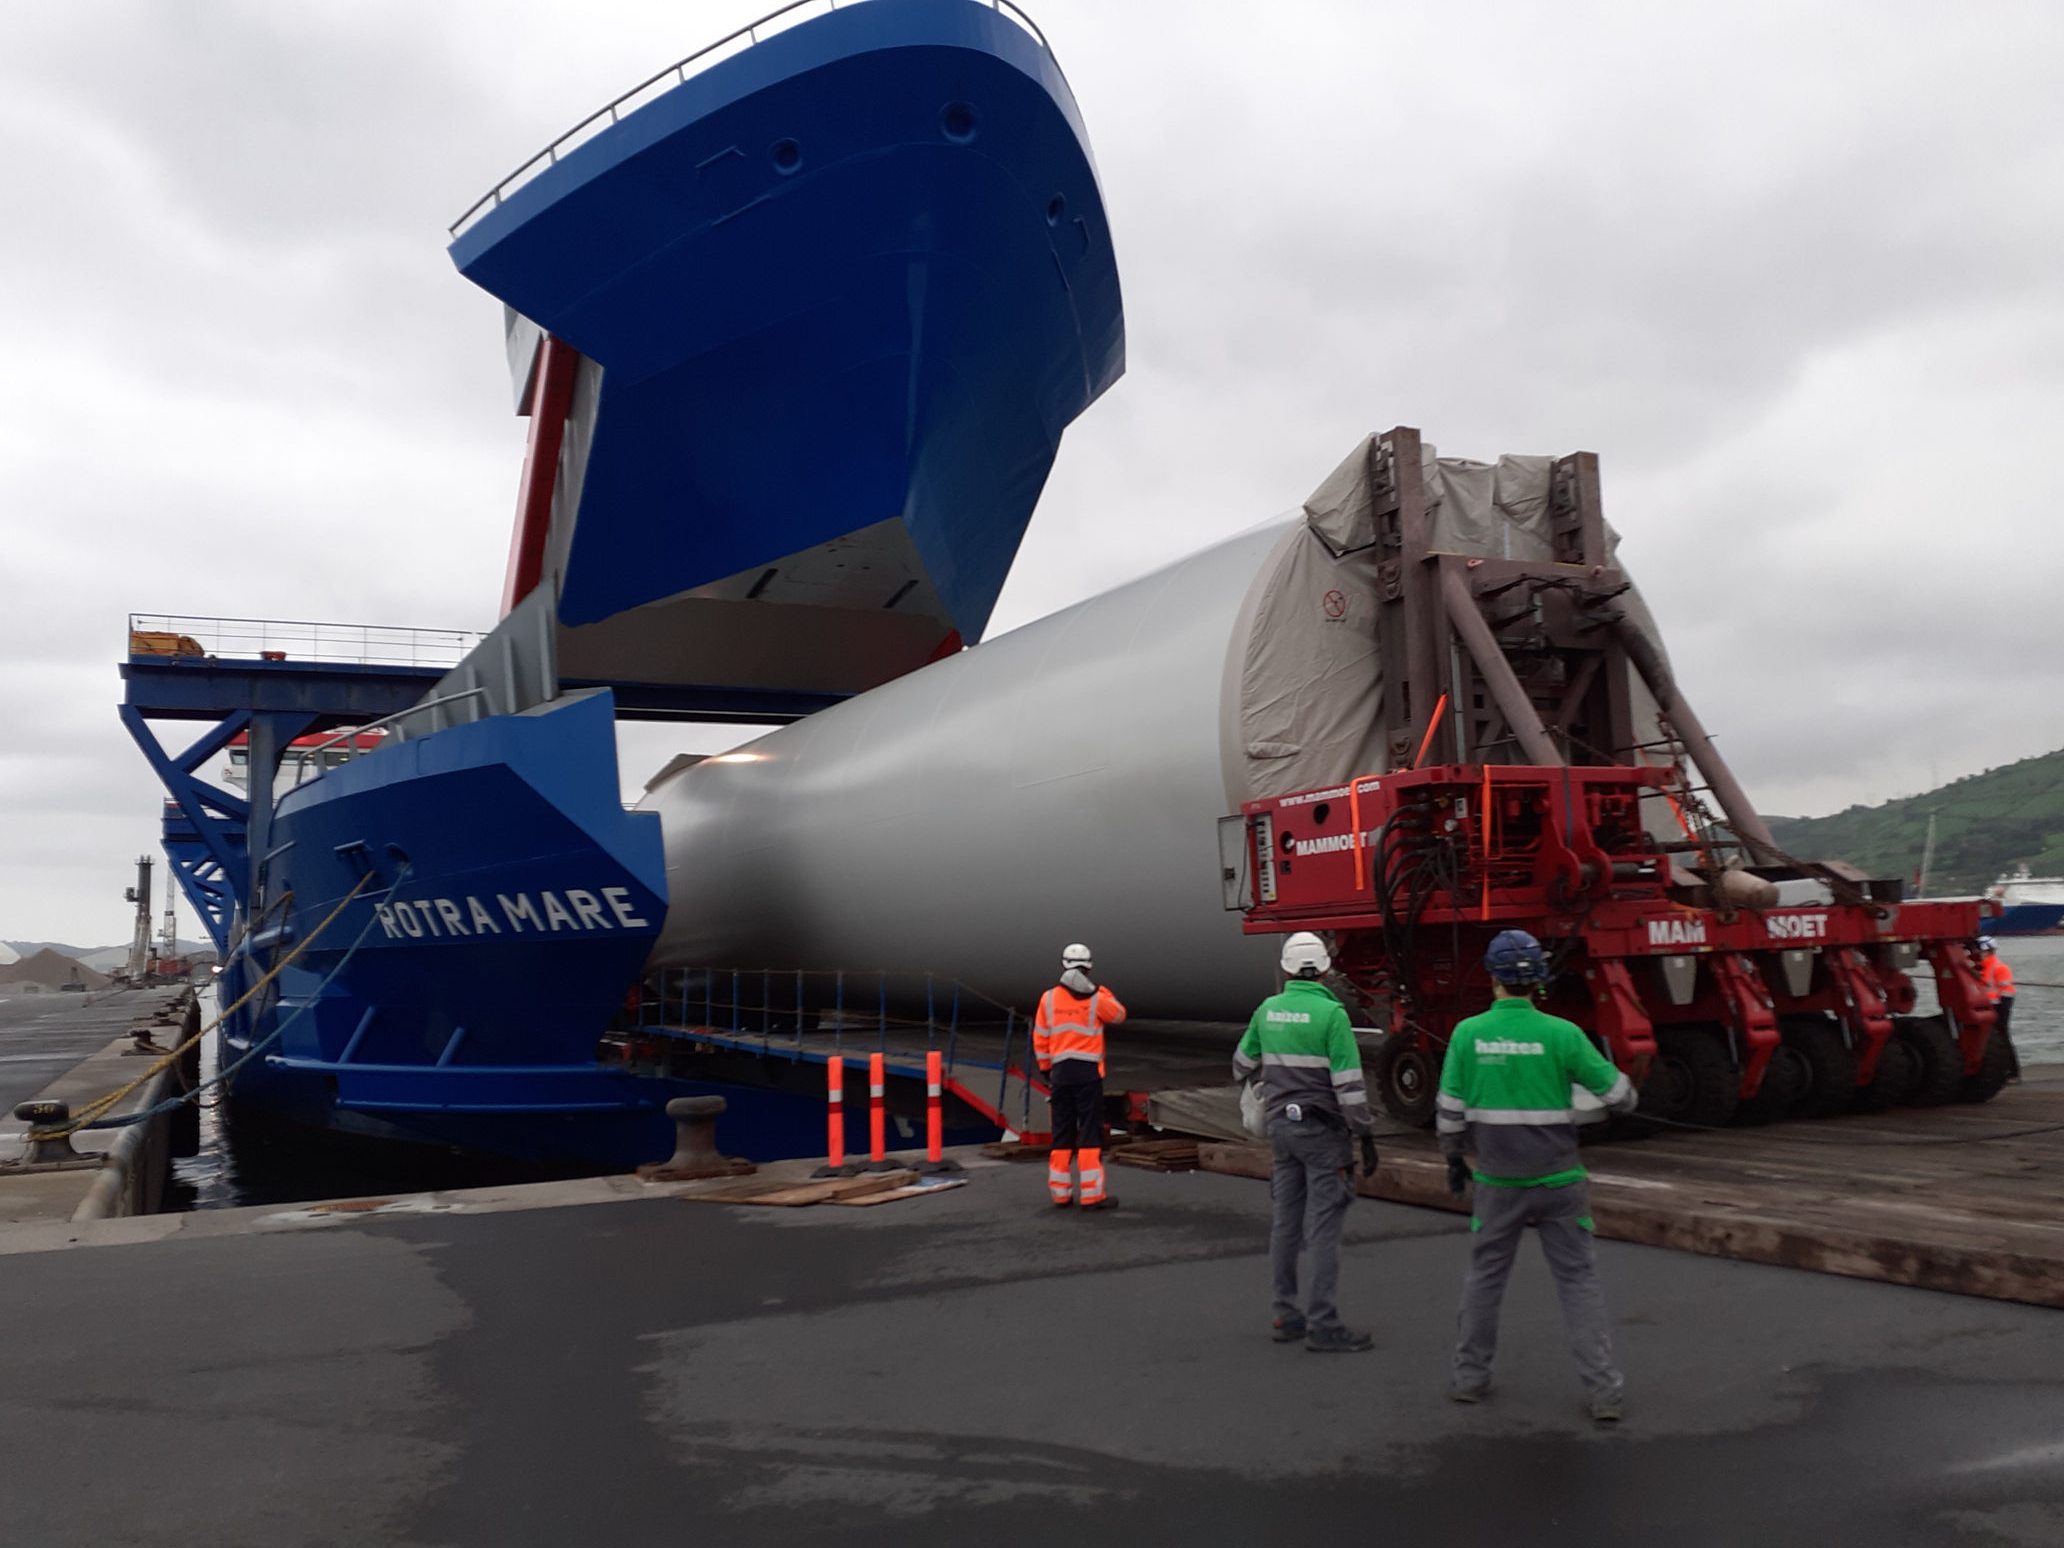 Haizea wind turbine tower being loaded onto Rotra Mare vessel